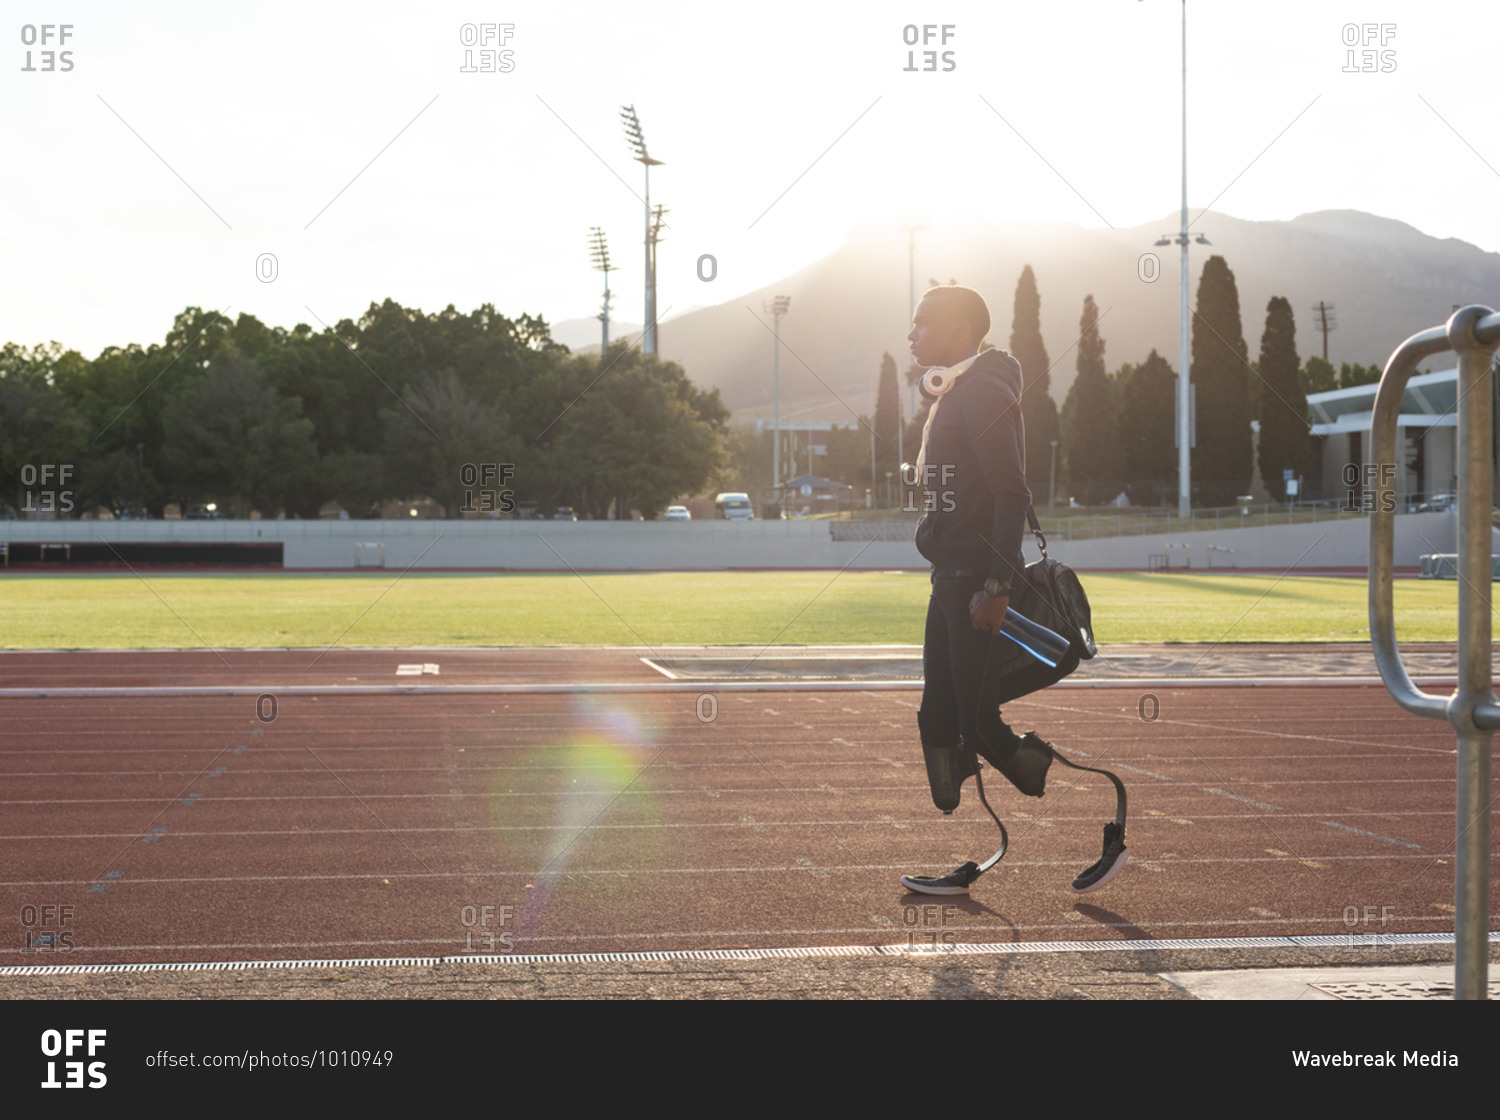 Fit, mixed race disabled male athlete at an outdoor sports stadium, walking with gym bag and water bottle on race track wearing running blades. Disability athletics sport training.